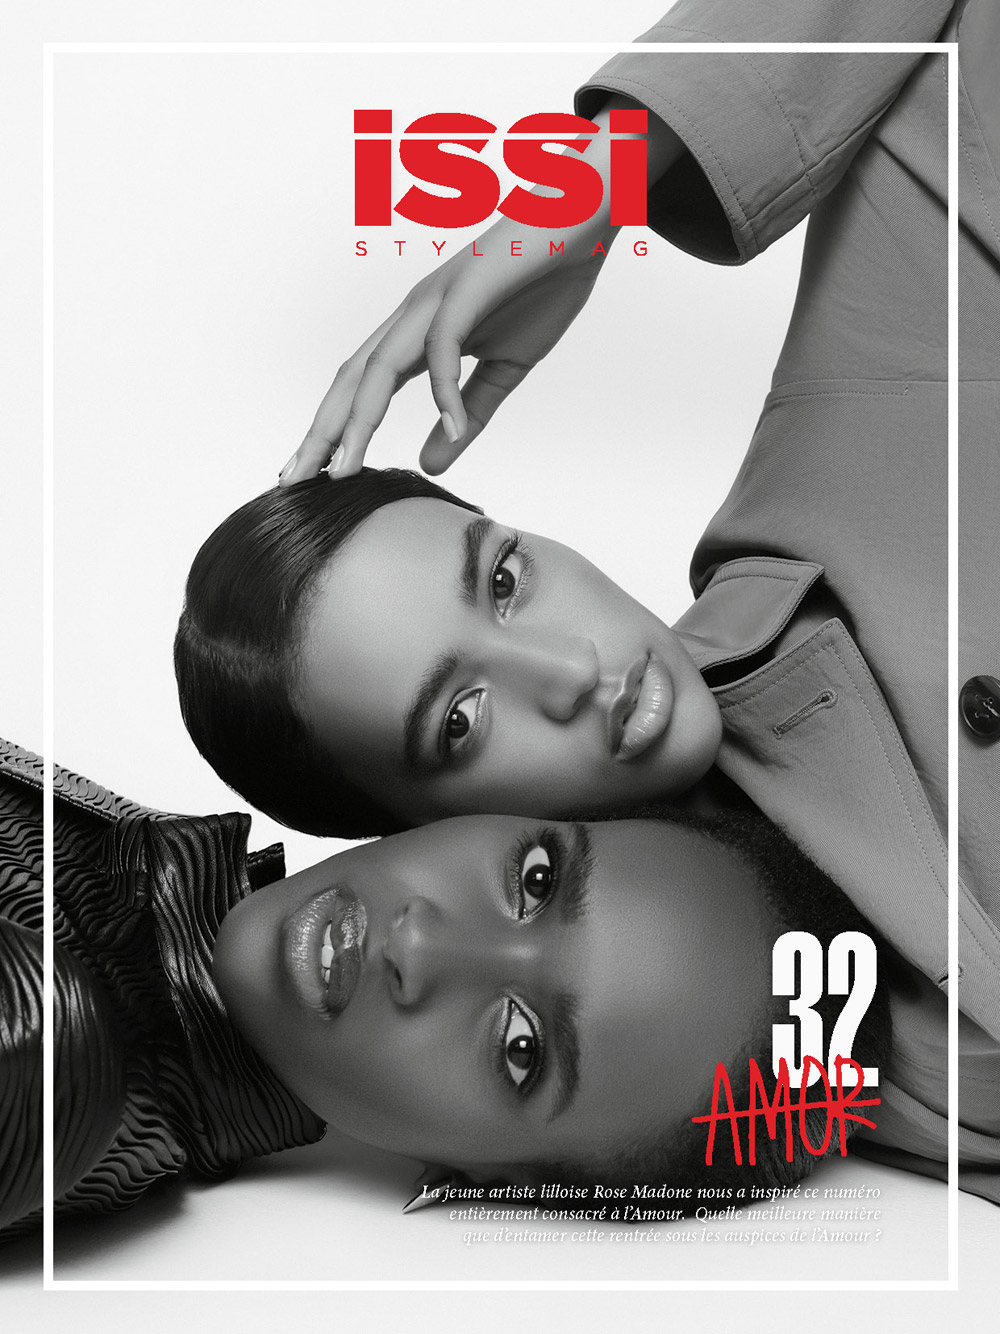 ISSI Stylemag #32